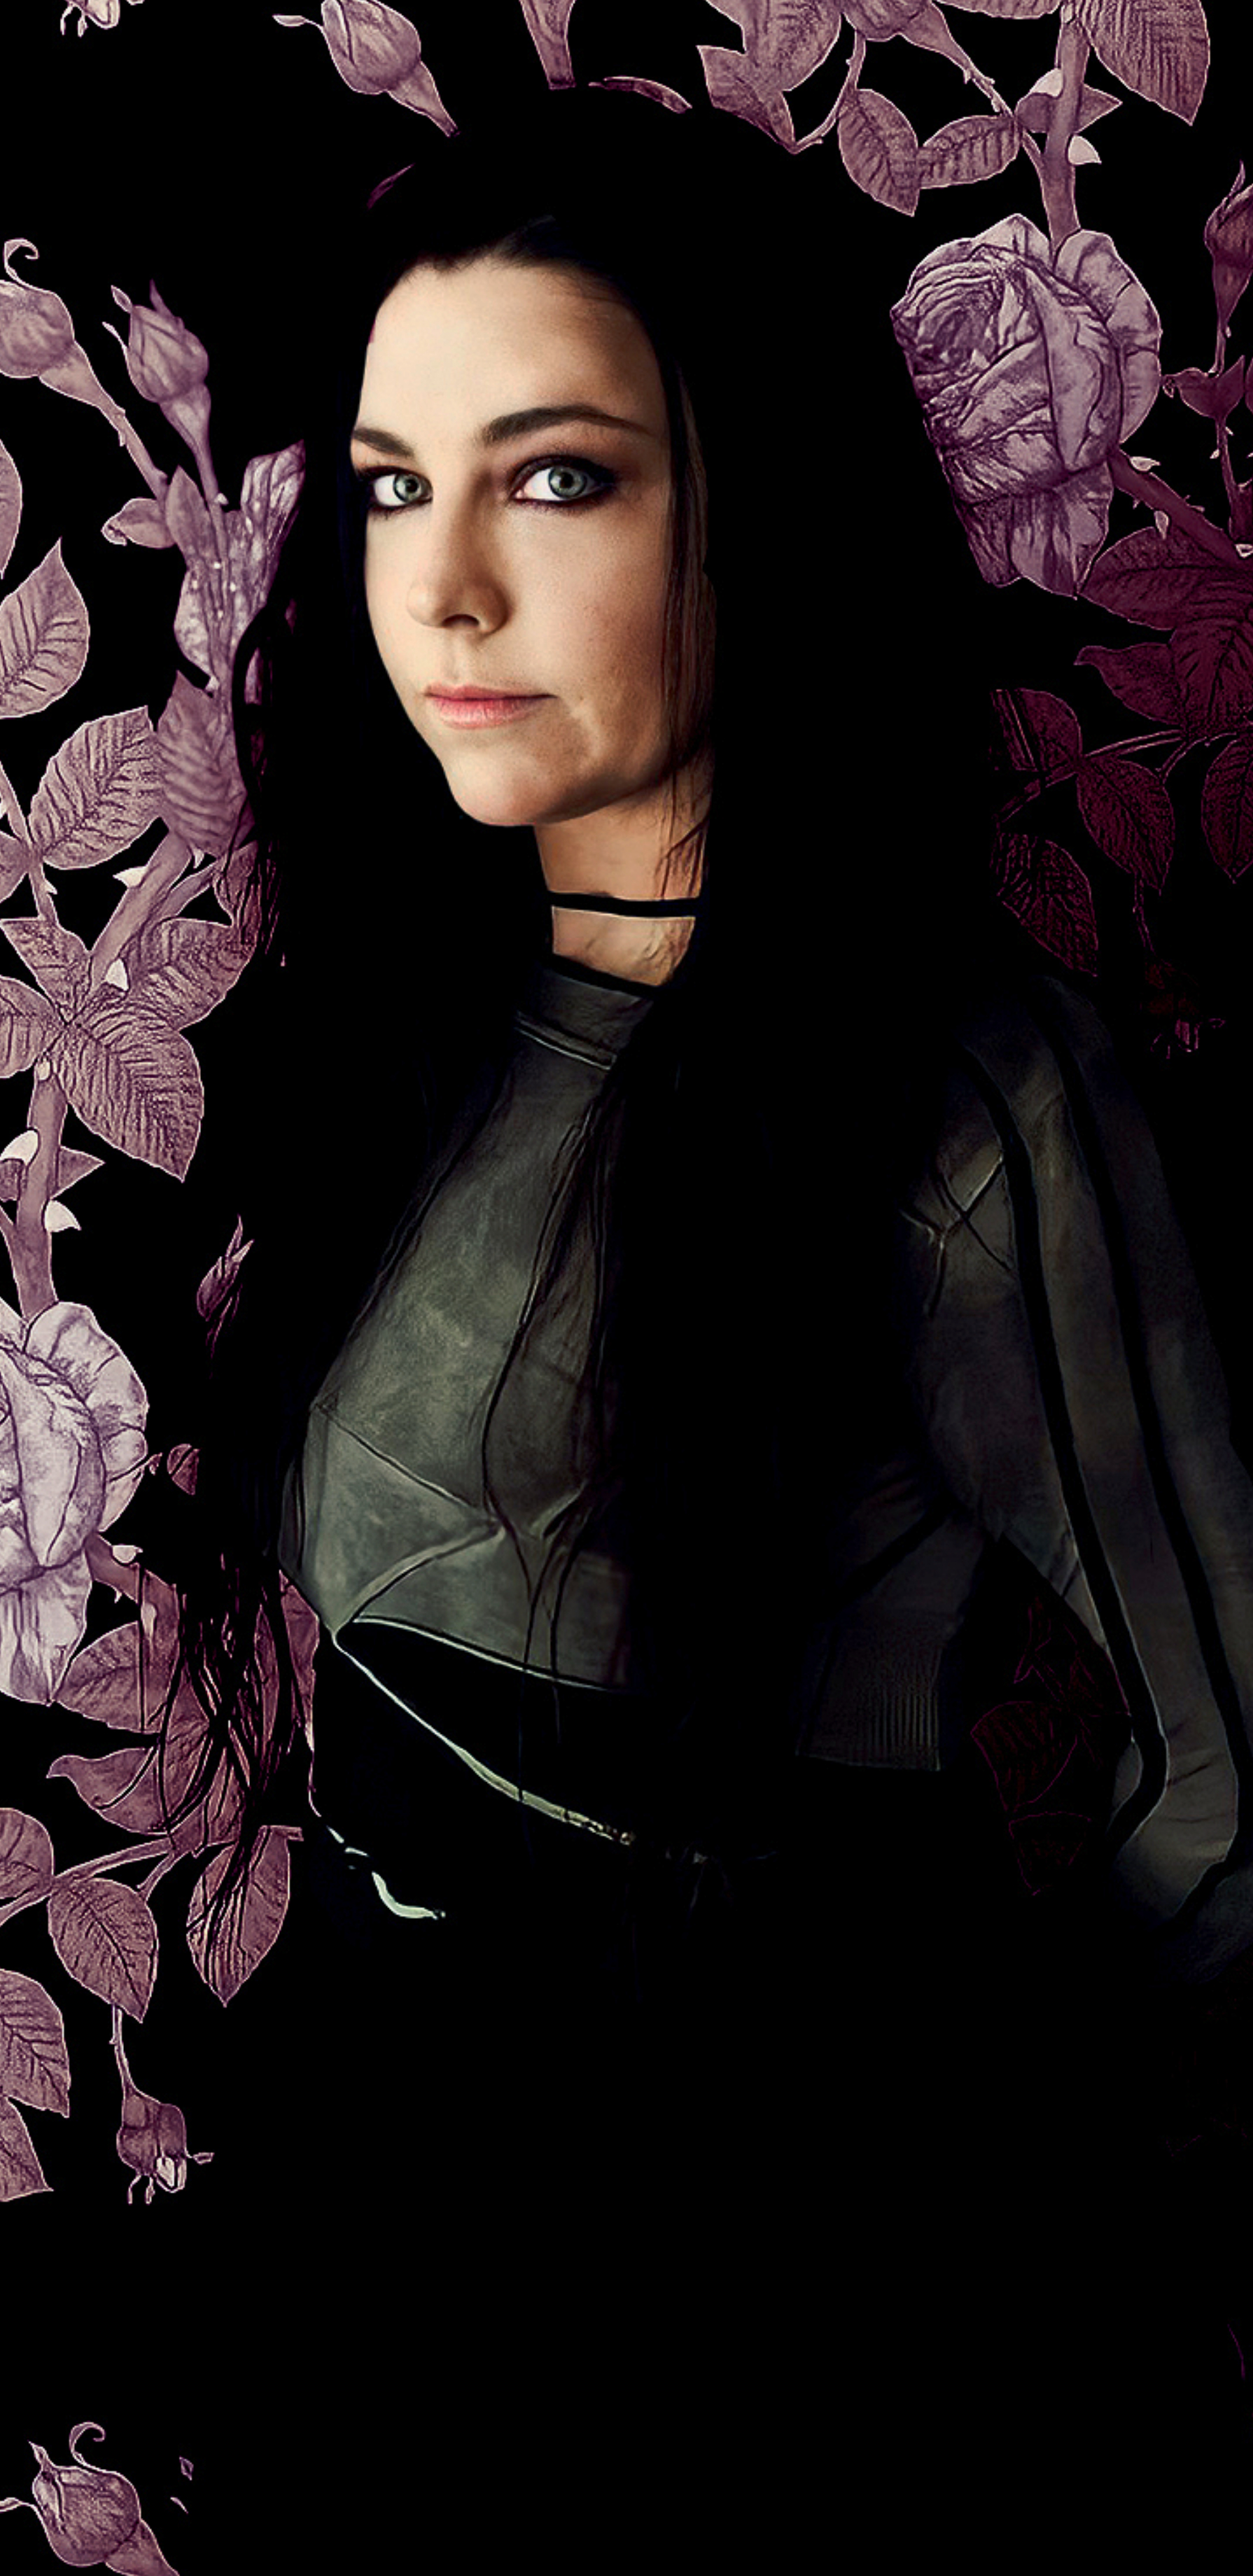 1920x3946
Keywords: the bitter truth;promo;photoshoot;2021;amy lee